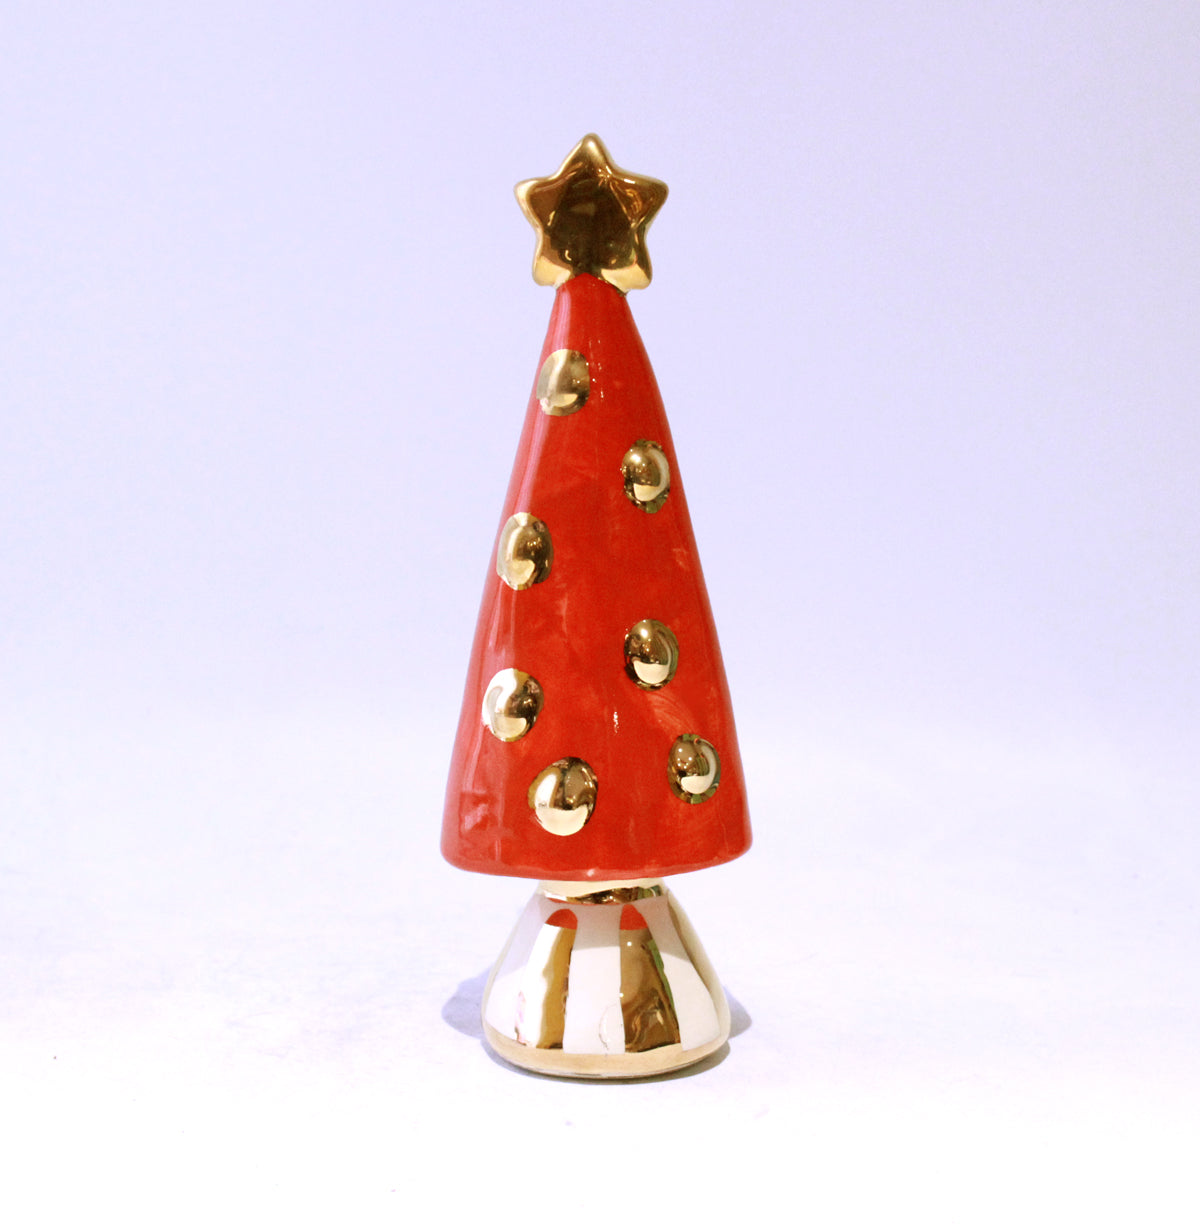 Small Christmas Tree in Red with Gold Ornaments and a Gold and White Striped Base